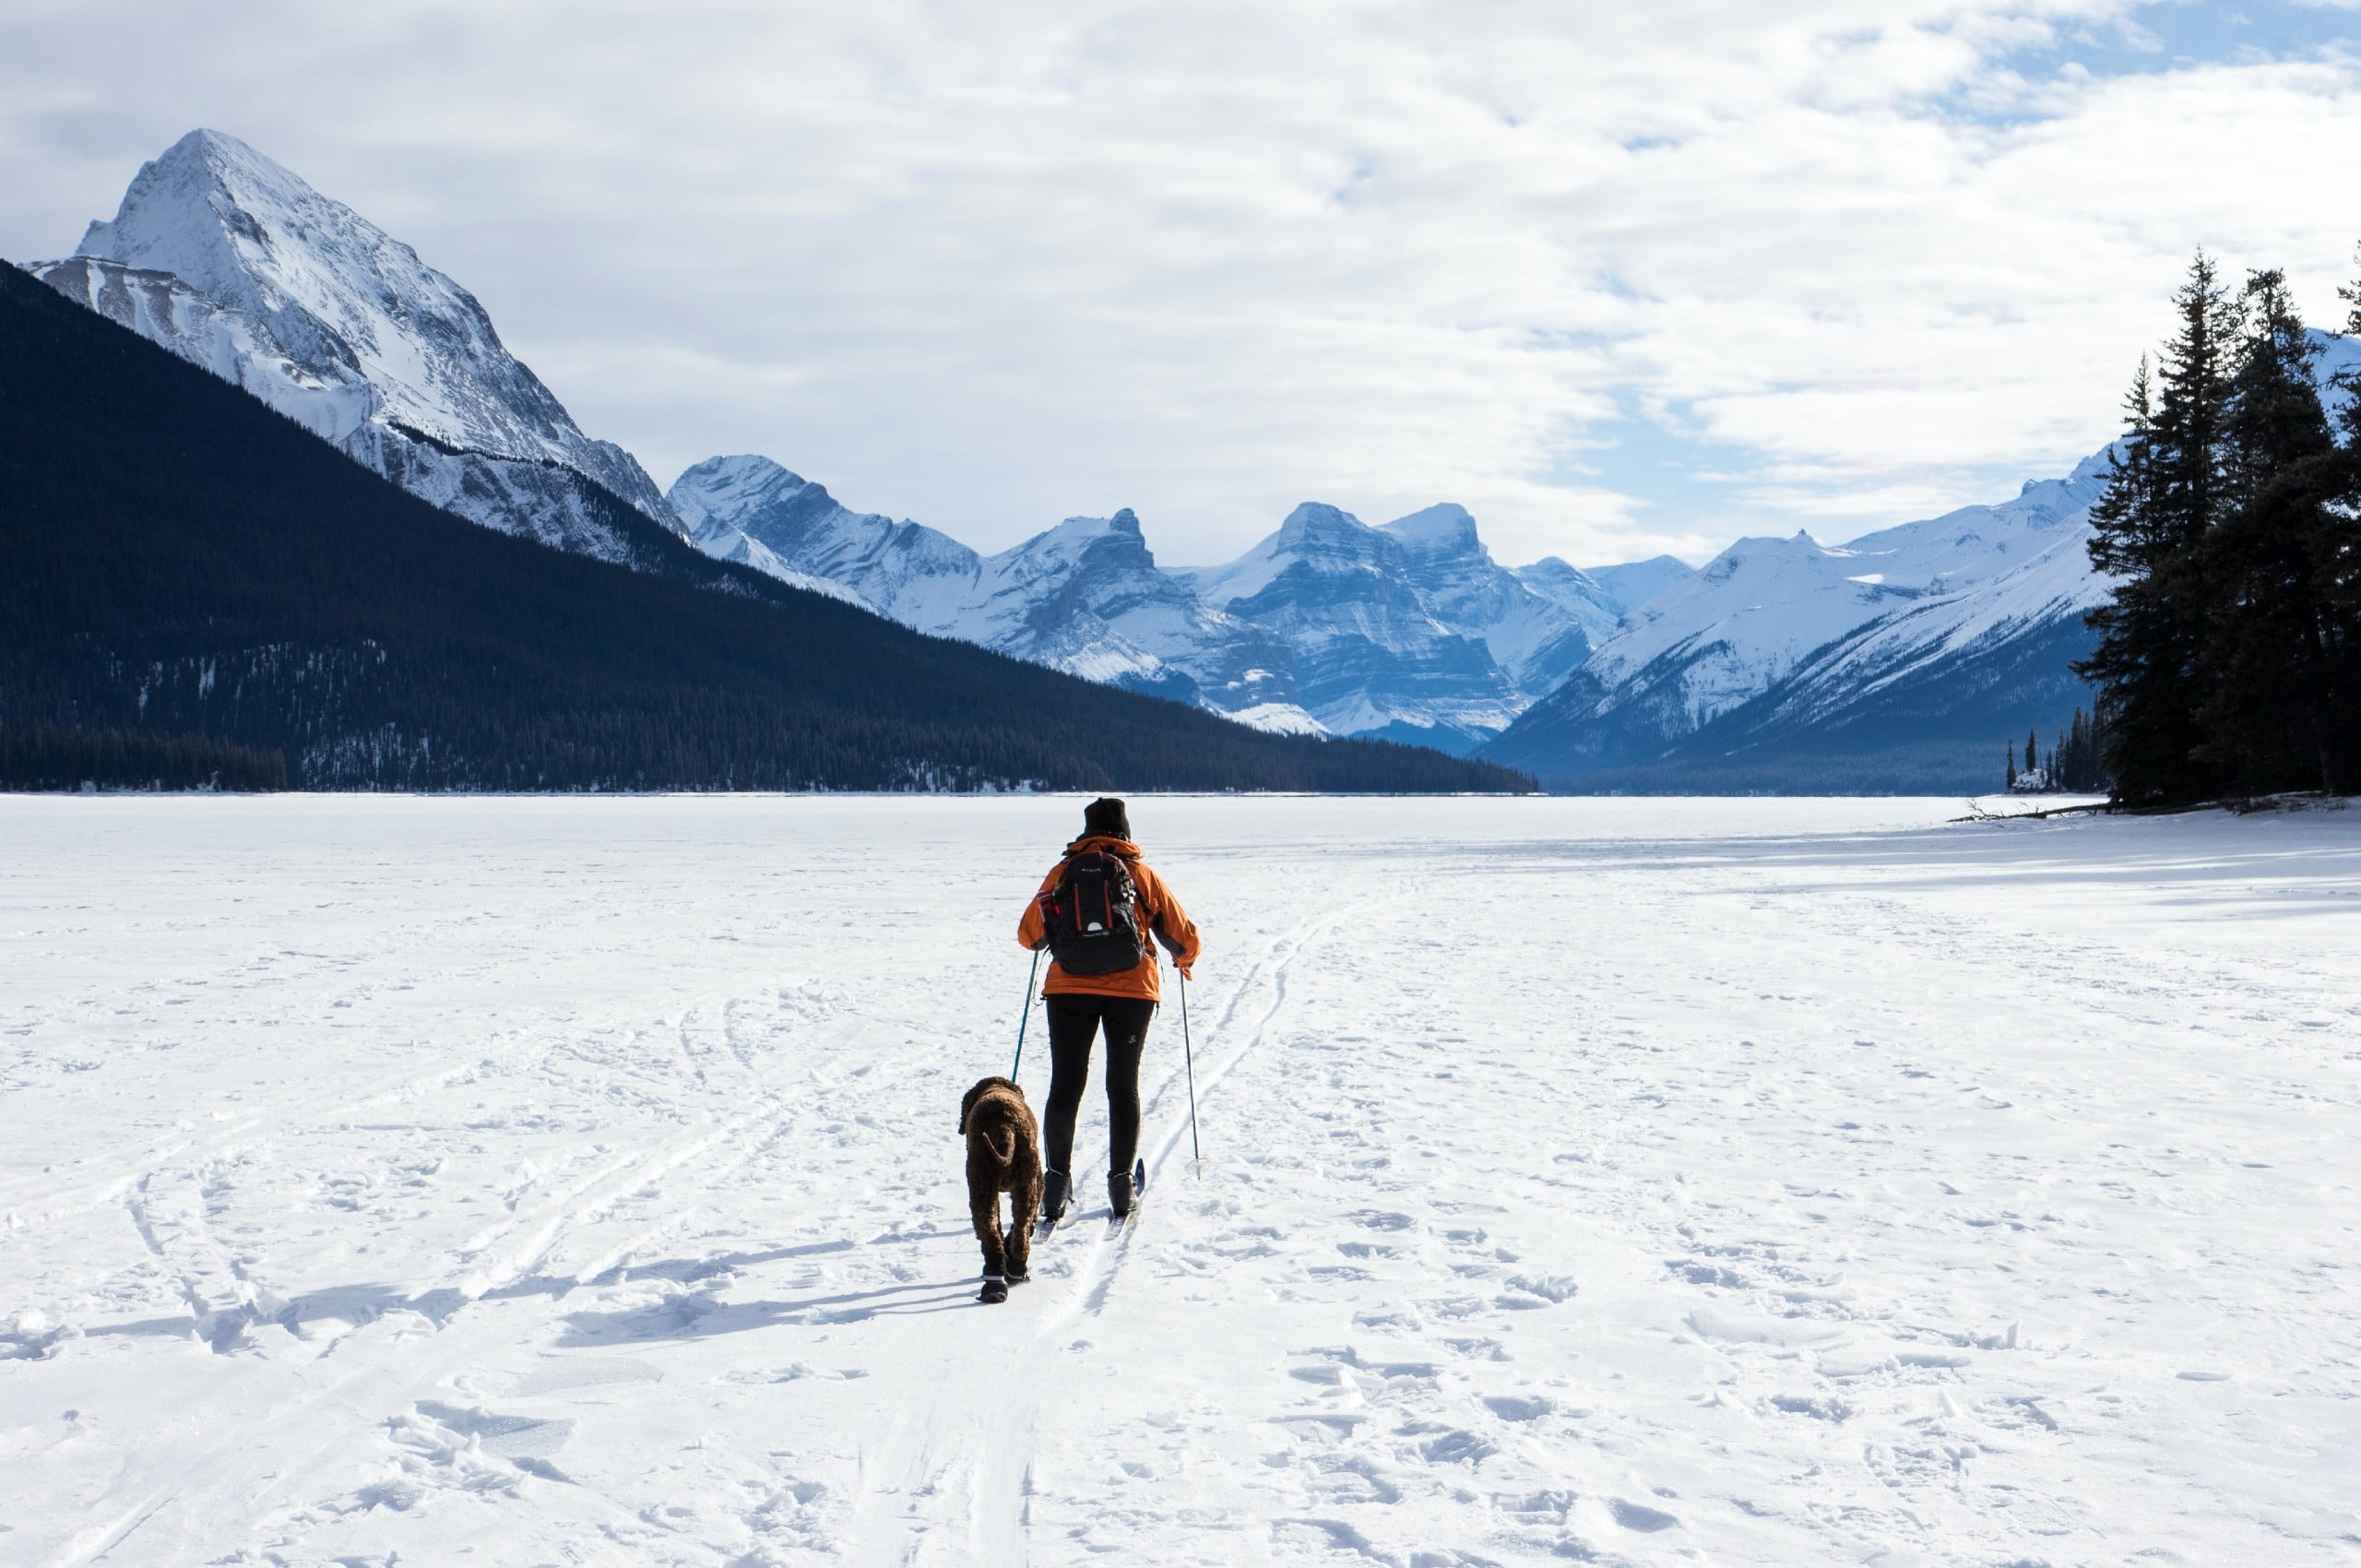 Winter hiking with a dog in Kananaskis